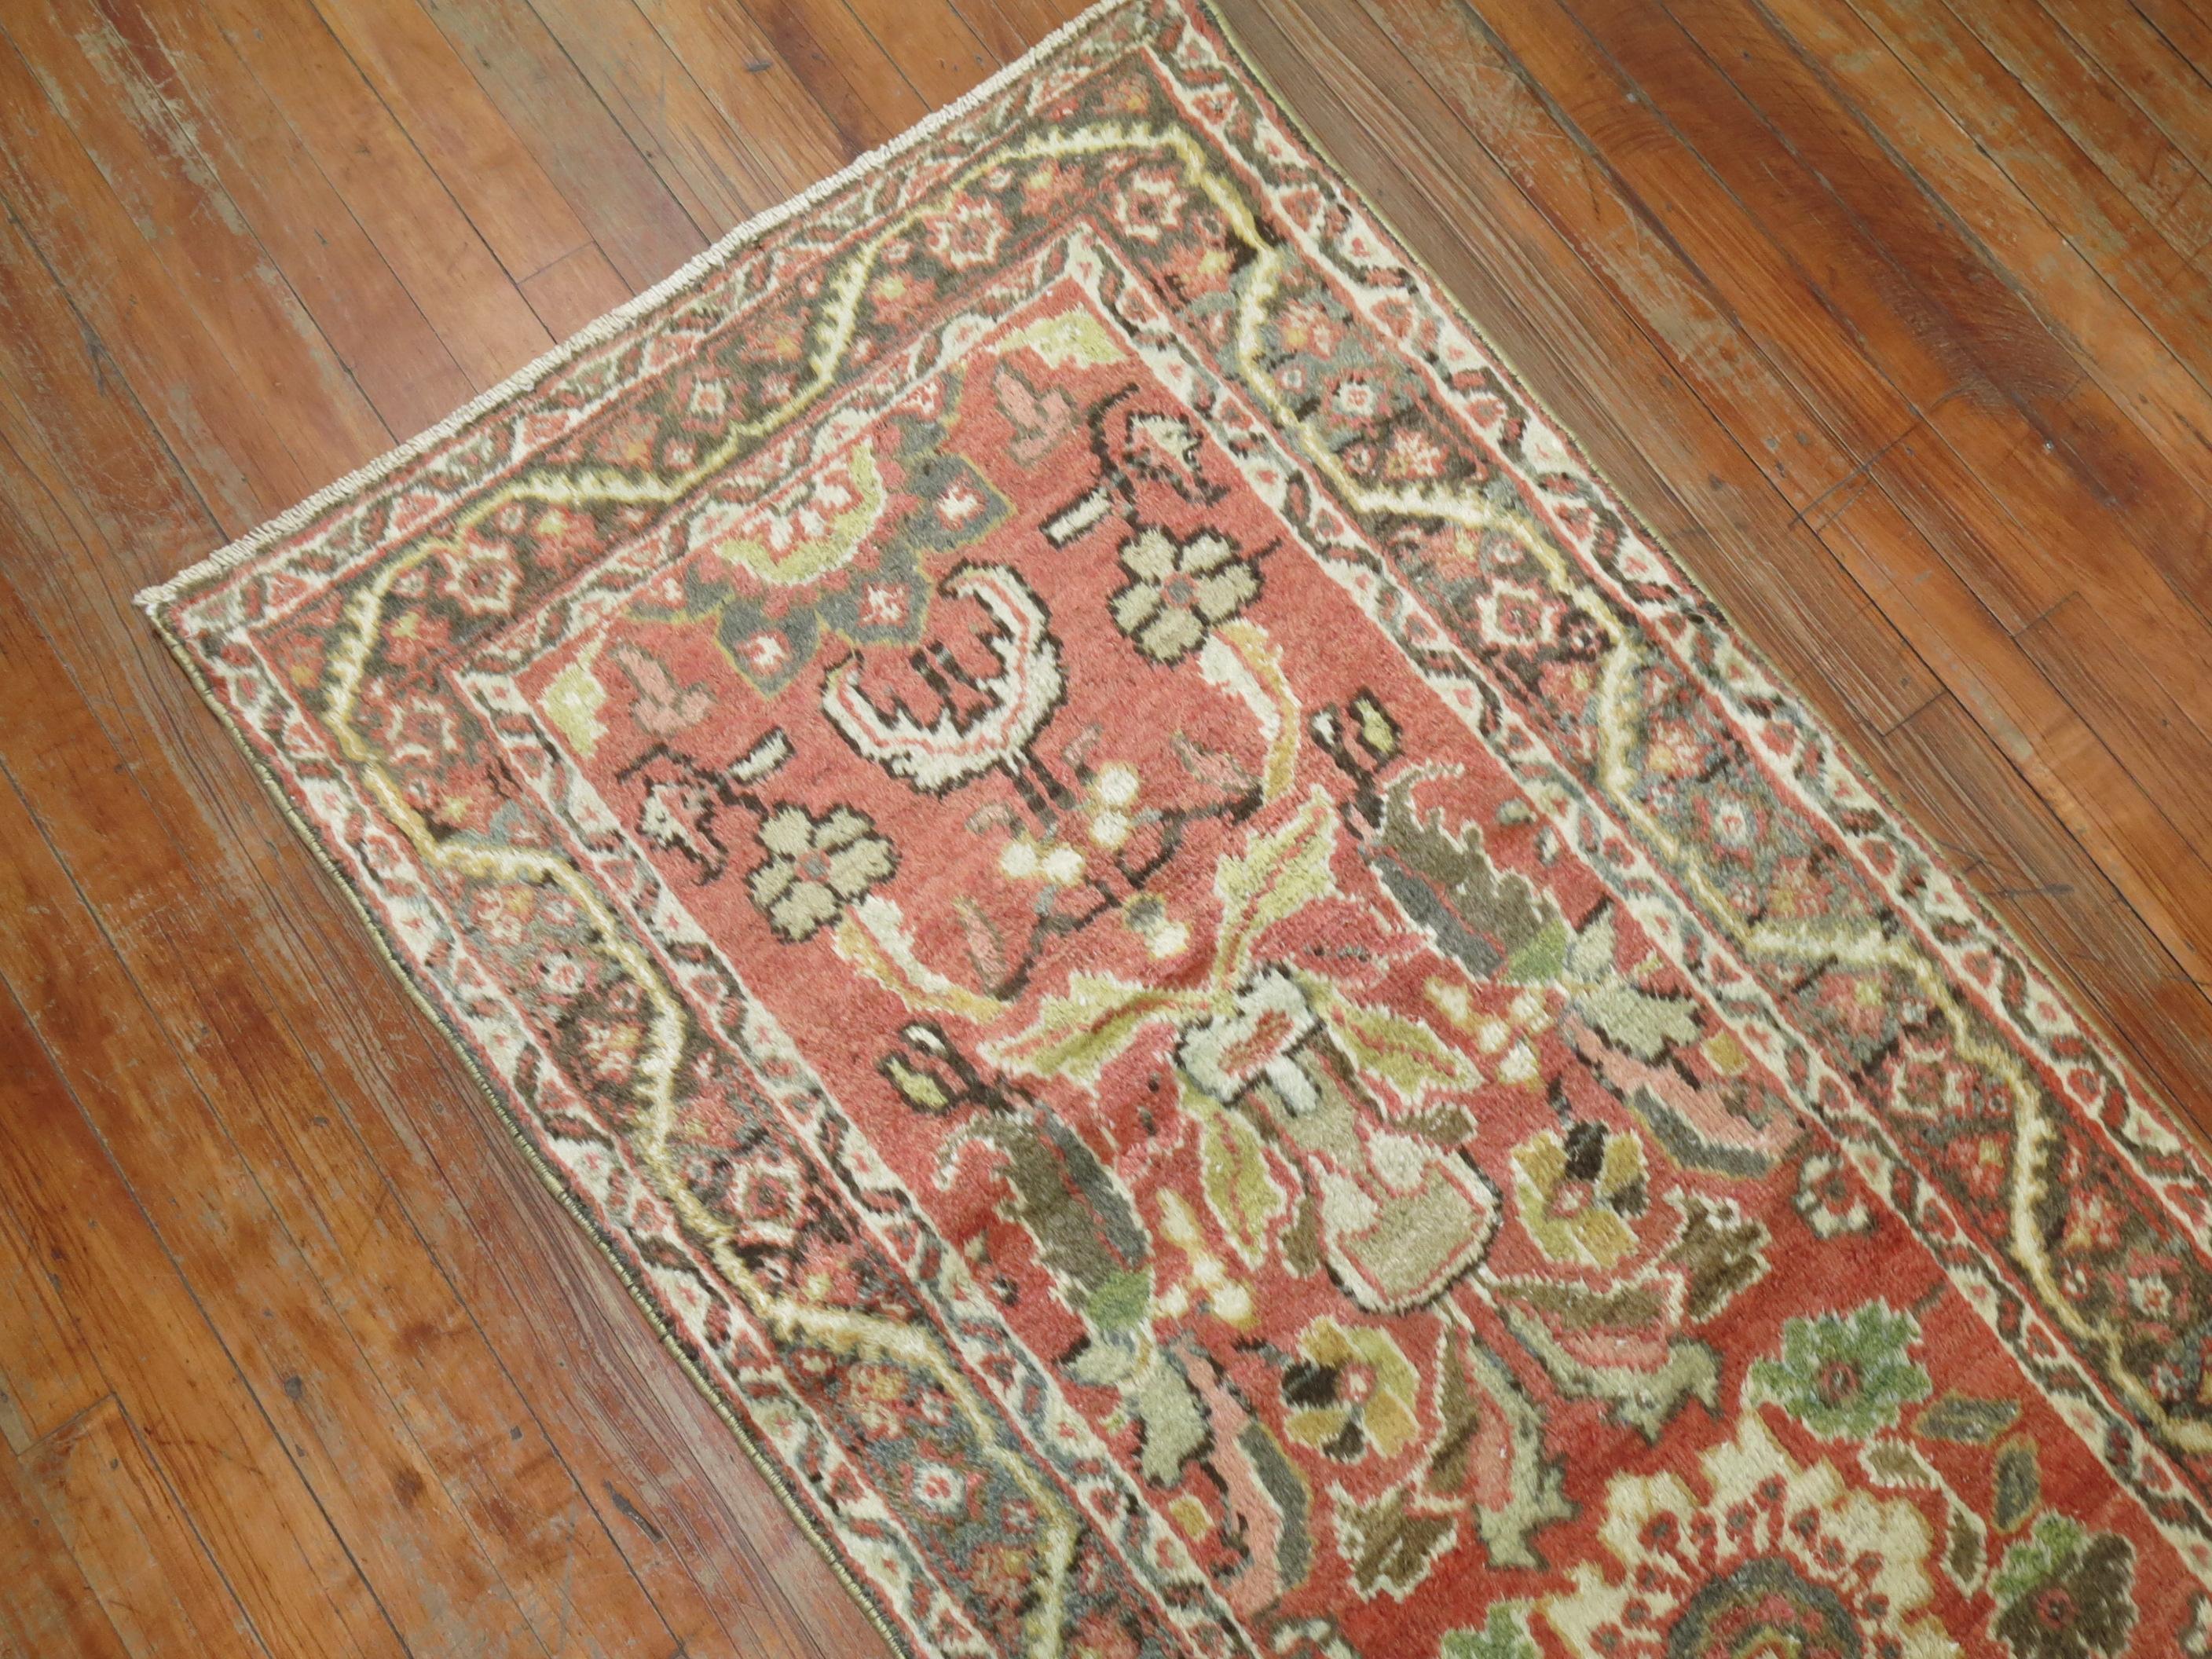 Persian Mahal runner with an all-over motif in soft muted palette

2'6'' x 11'3''

Mahal Persian carpets from the 19th century and turn of the 20th century have become one of the most desirable among Persian village weaving's, as they appeal